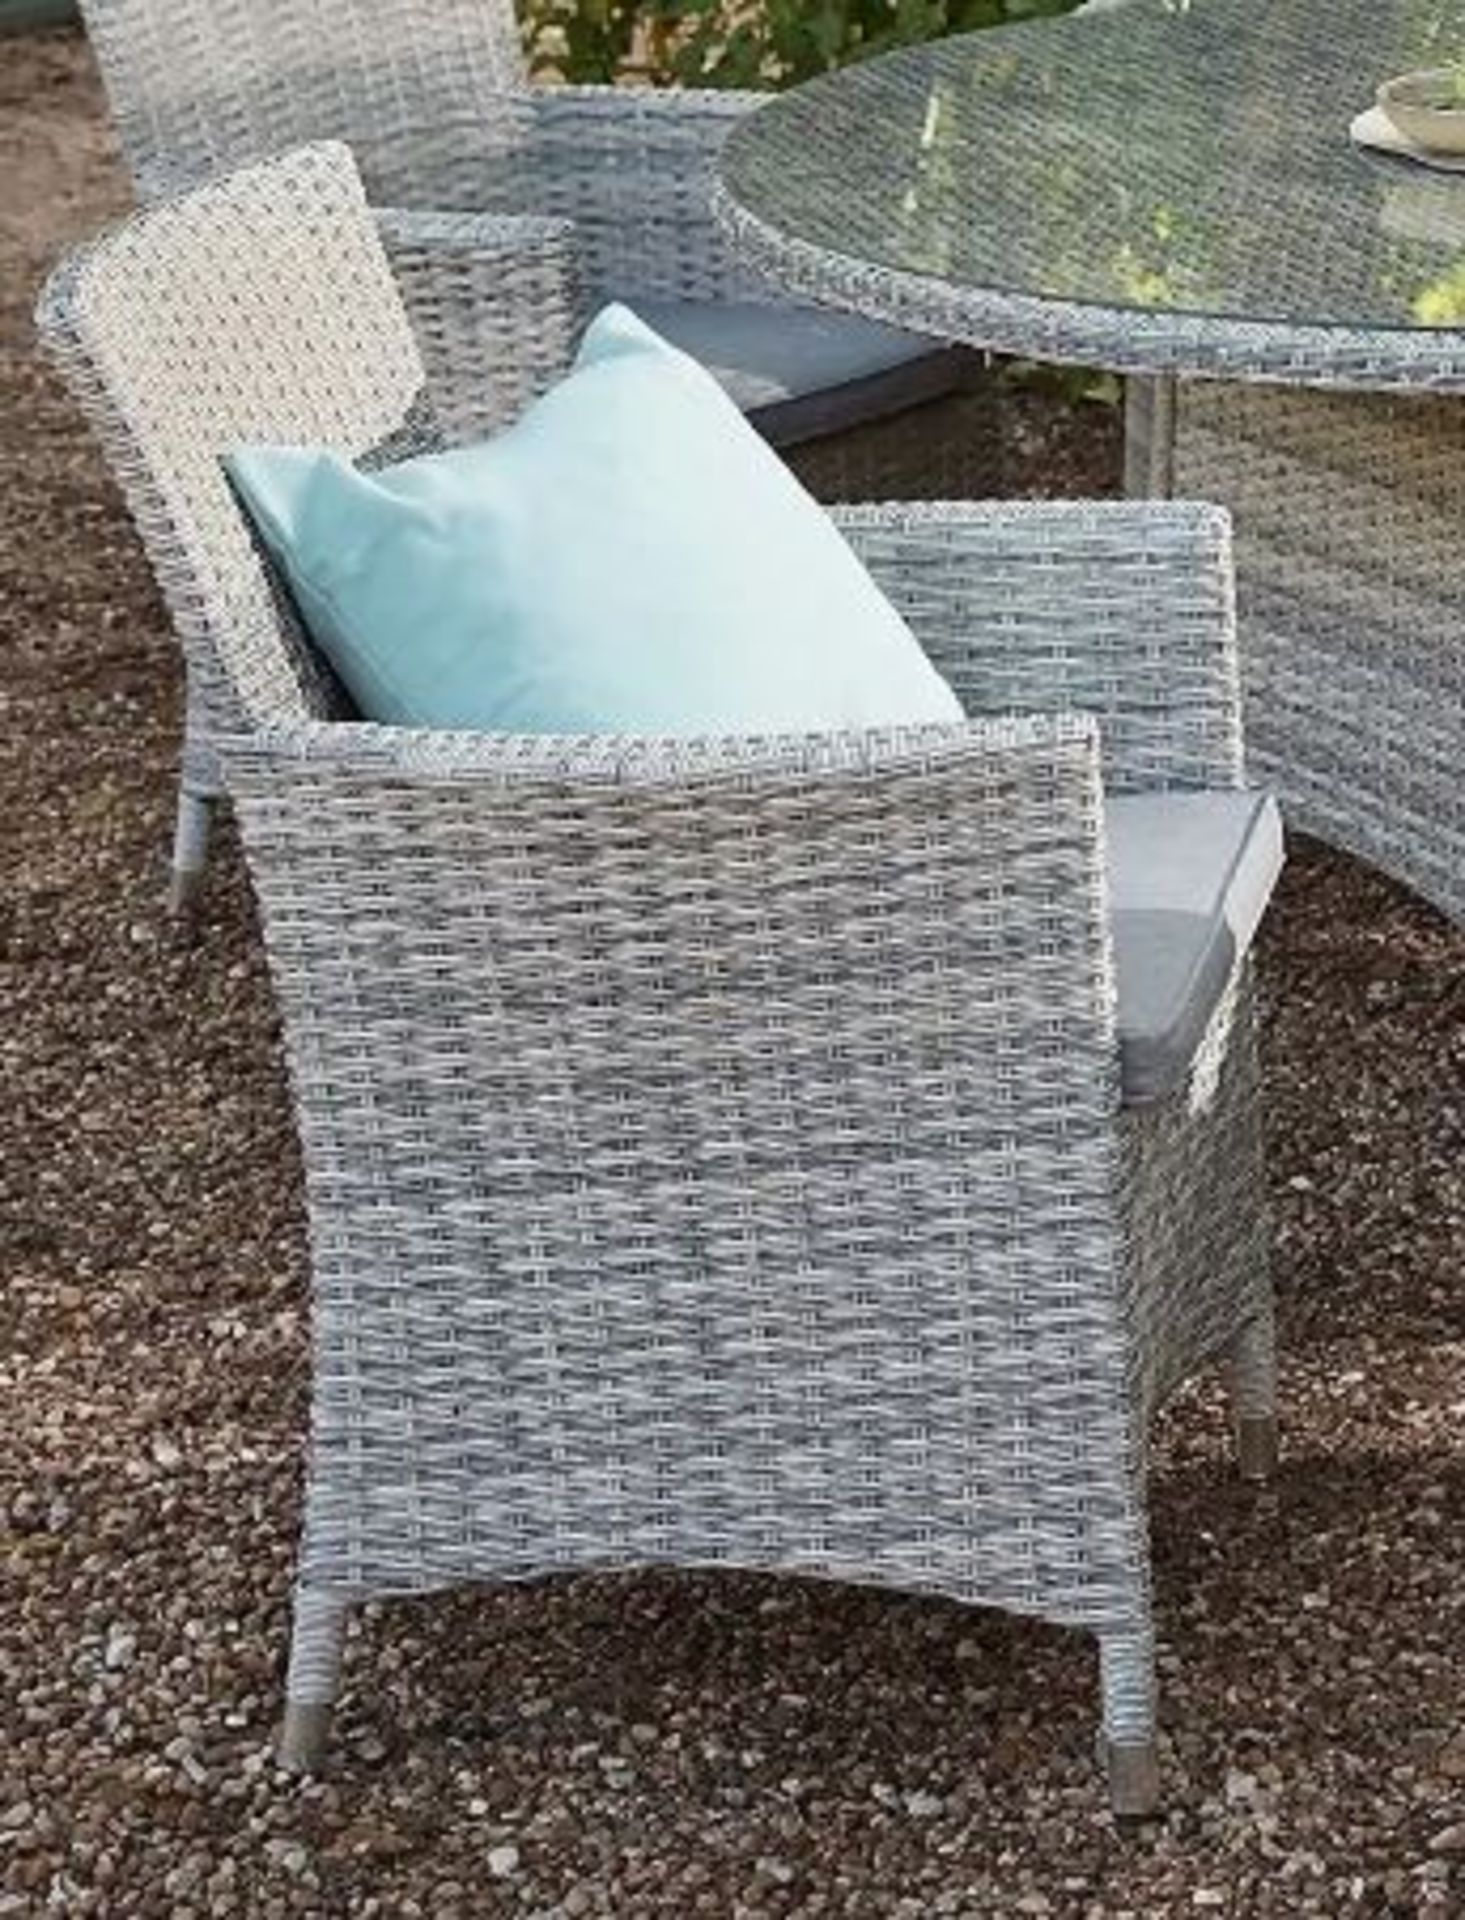 (15) 2x Hartington Florence Collection Rattan Dining Chair With 2x Cushions. (1x In Original Packag